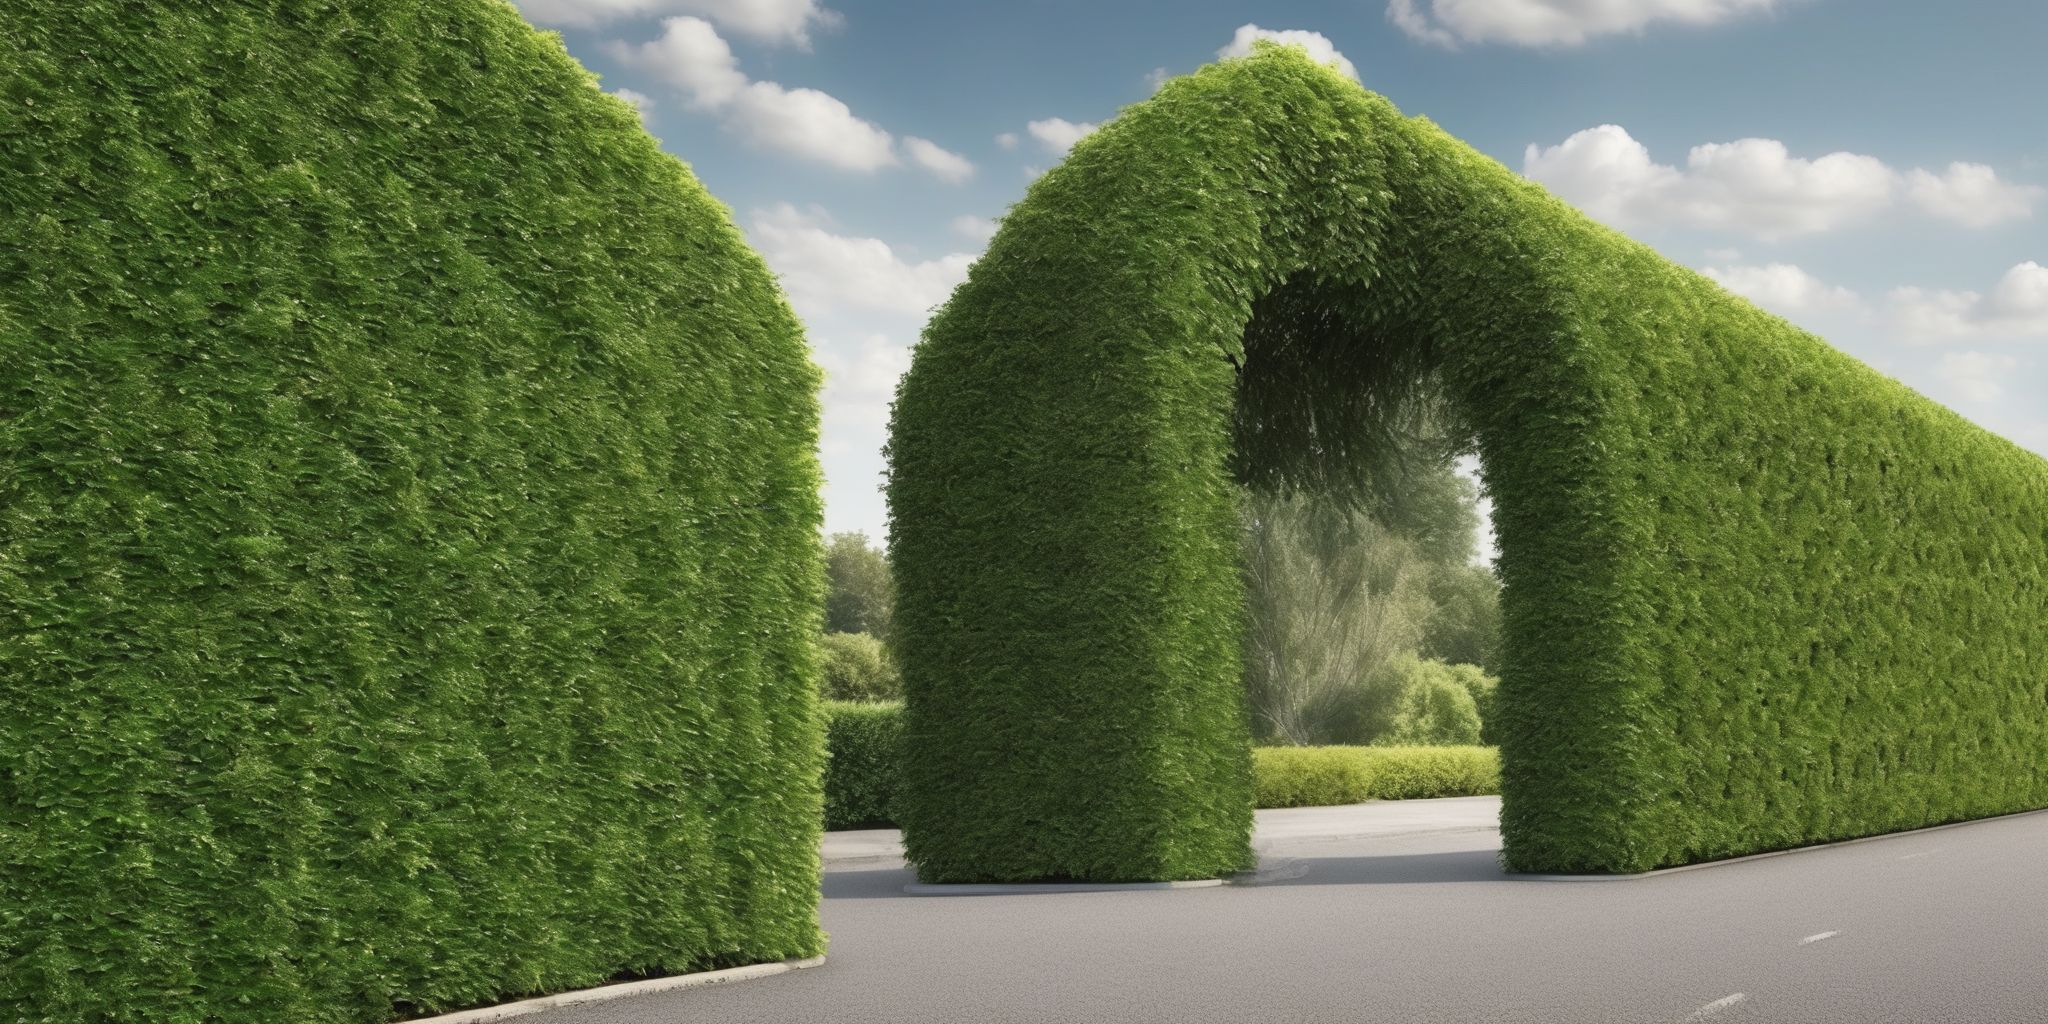 Protection hedge  in realistic, photographic style